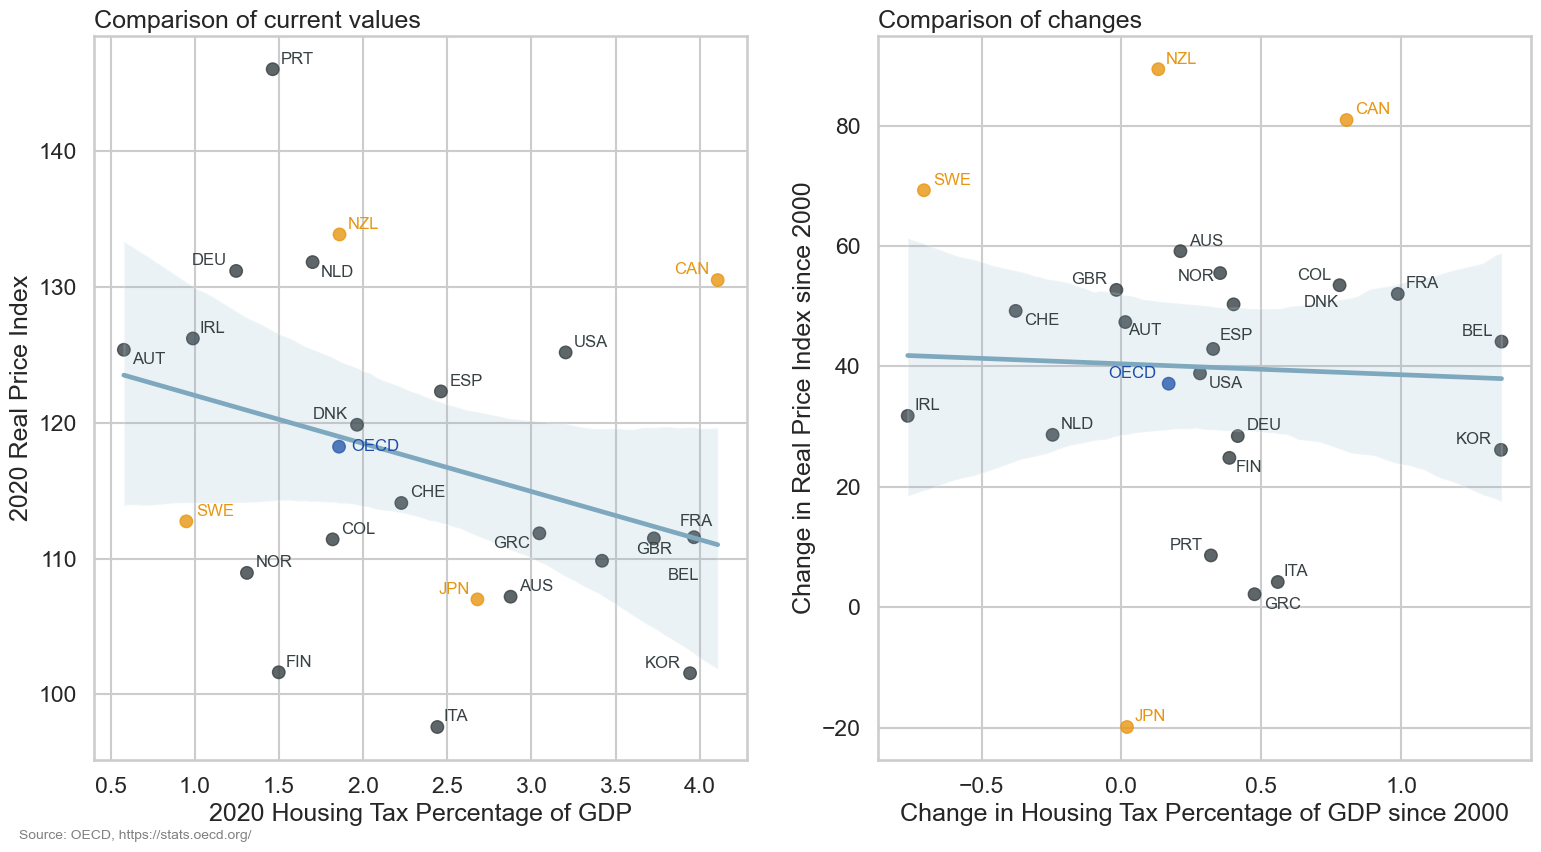 Scatter plot showing the relationship between housing tax as a percentage of GDP and Real Price Index in 2020 and the changes since 2000 for selected OECD countries